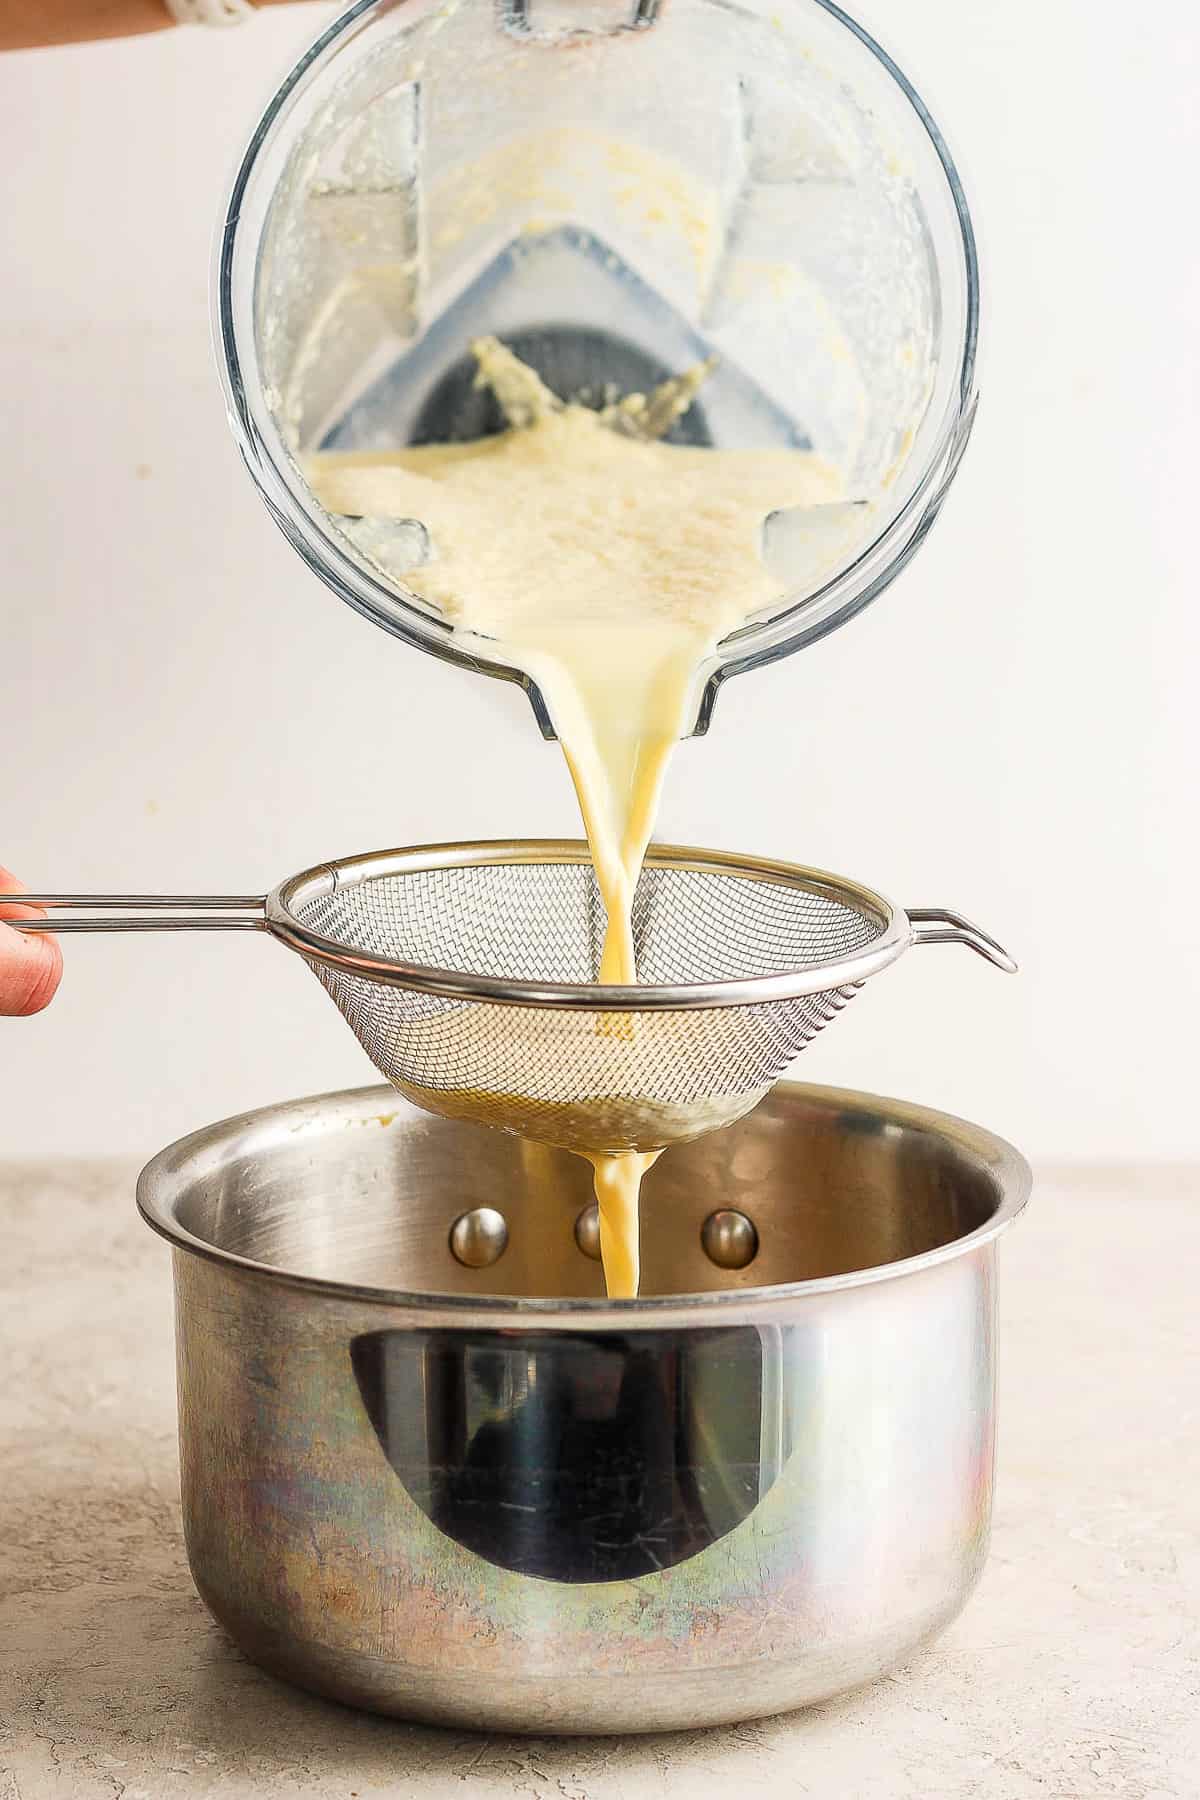 The blended corn mixture being poured through a fine mesh strainer and into a pot.